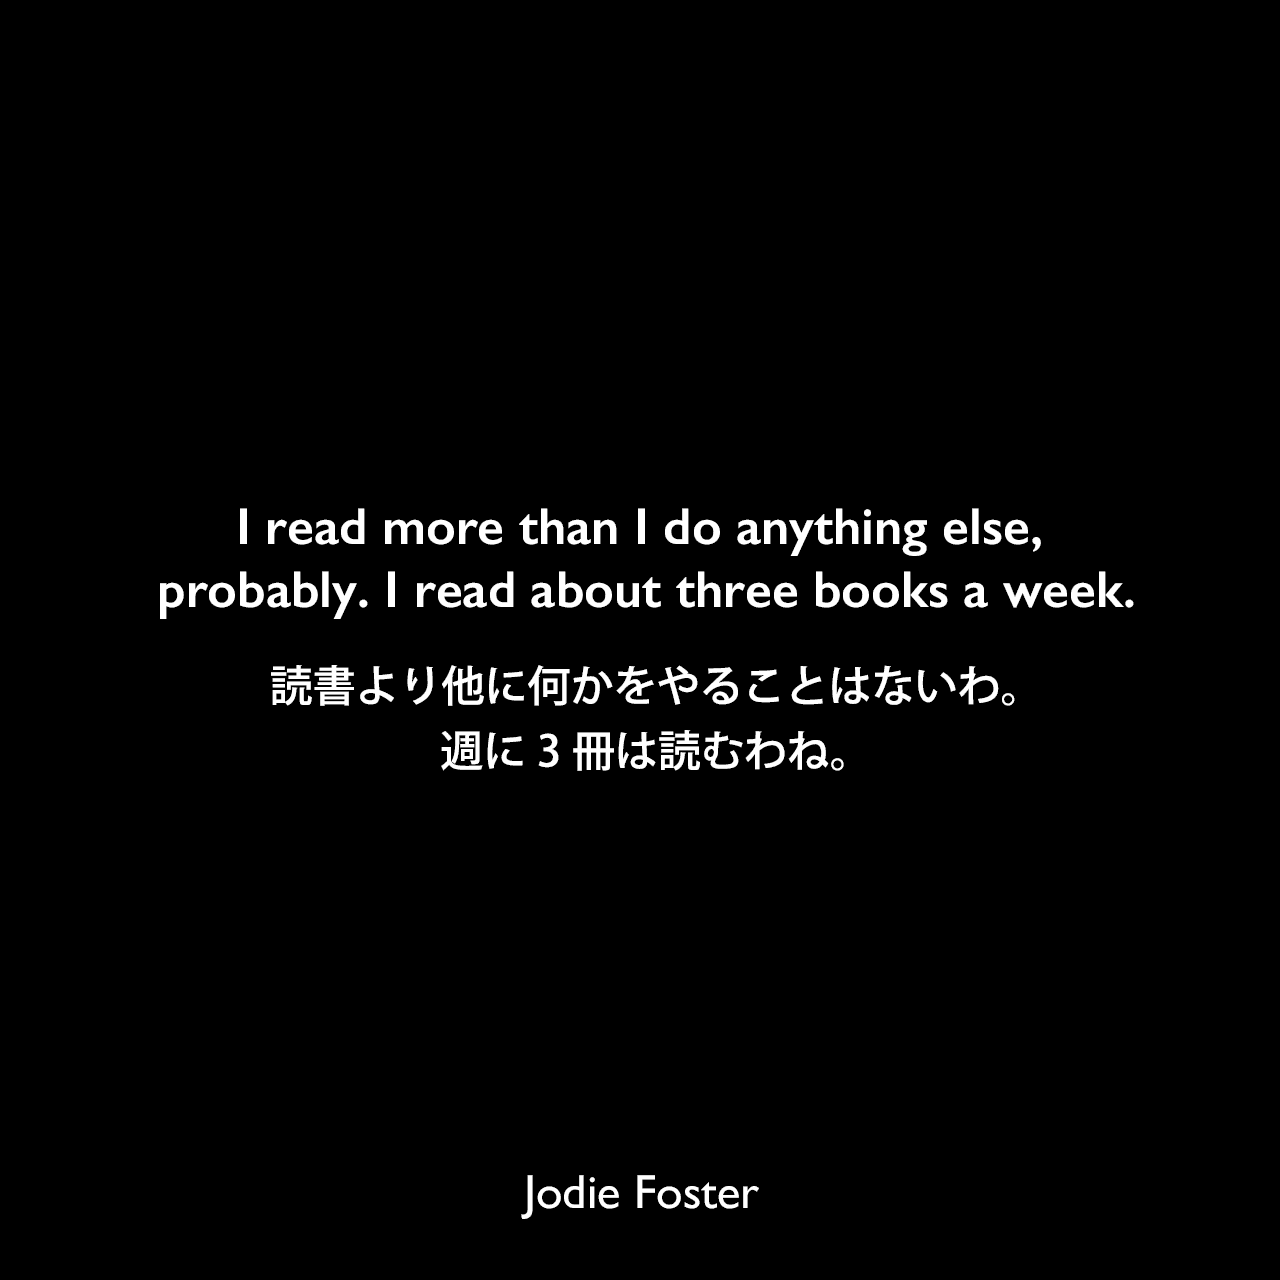 I read more than I do anything else, probably. I read about three books a week.読書より他に何かをやることはないわ。週に3冊は読むわね。Jodie Foster